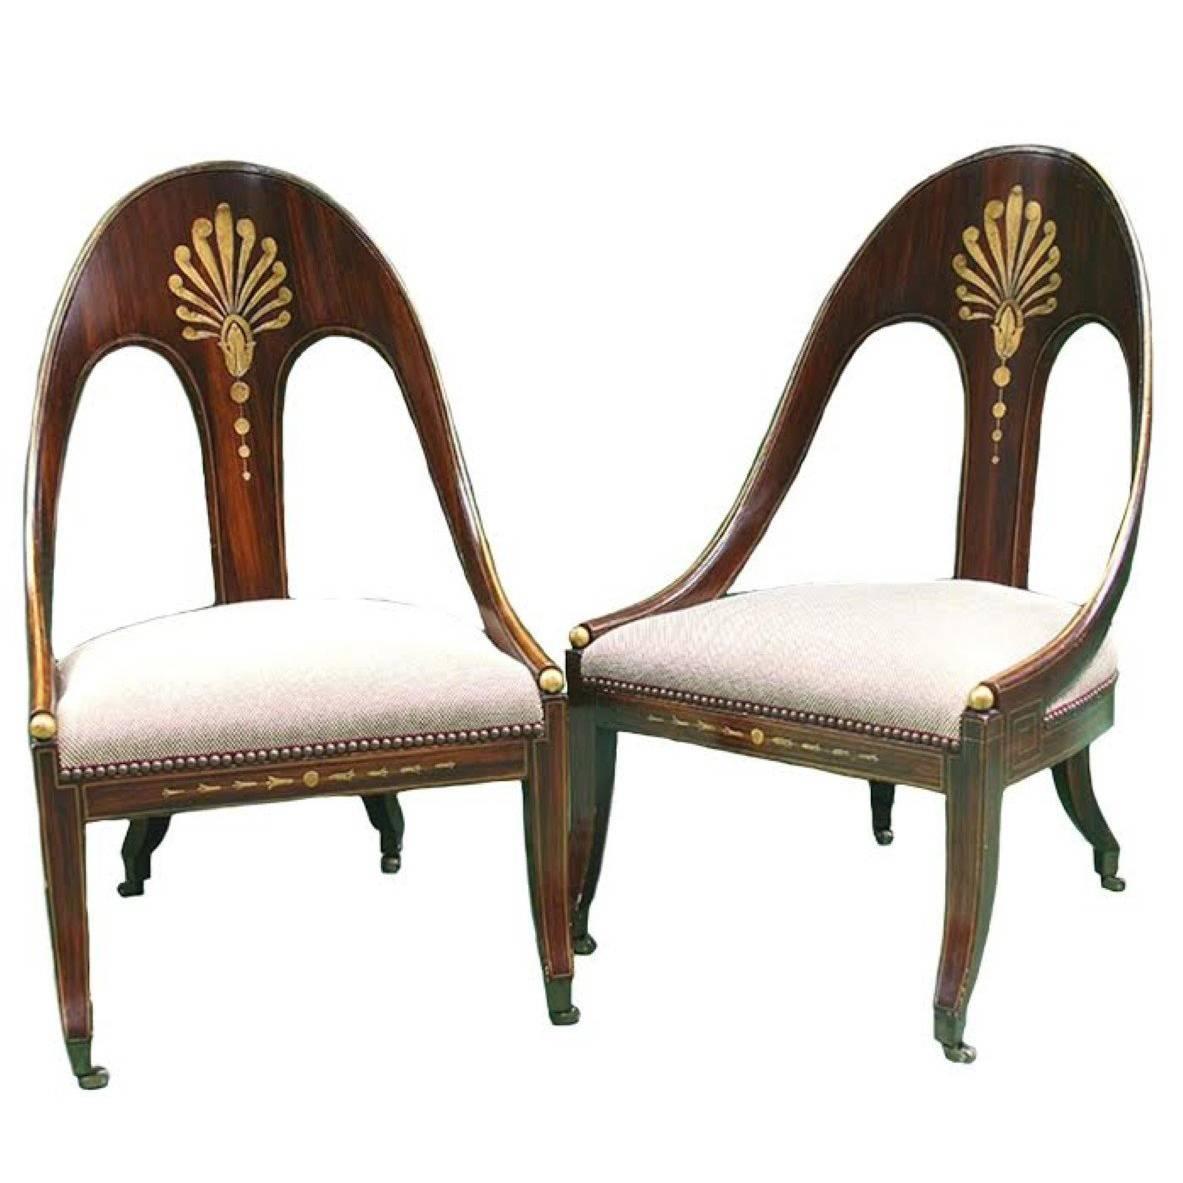 Pair of English George III Period Rosewood-Grained & Parcel-Gilt Spoonback Chair For Sale